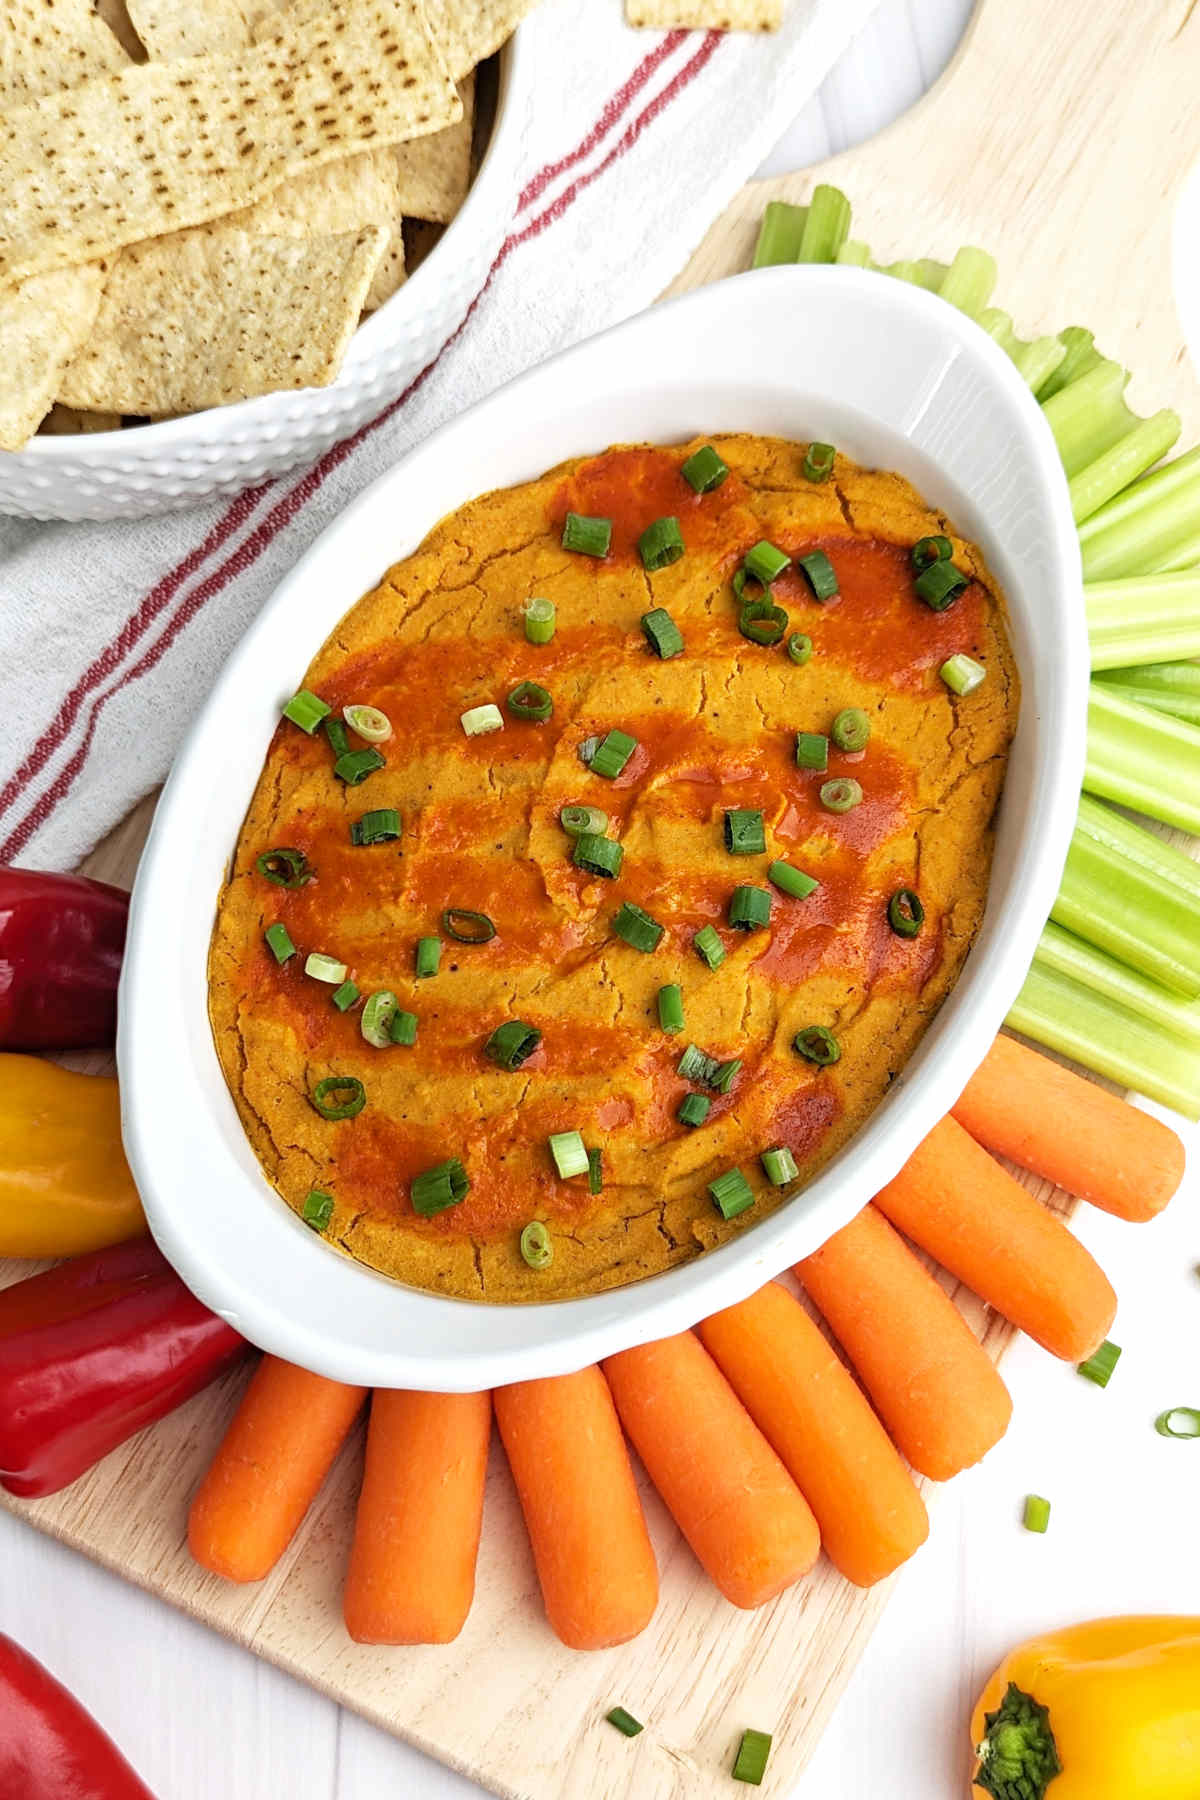 Buffalo chickpea dip served with a variety of fresh vegetable sticks.